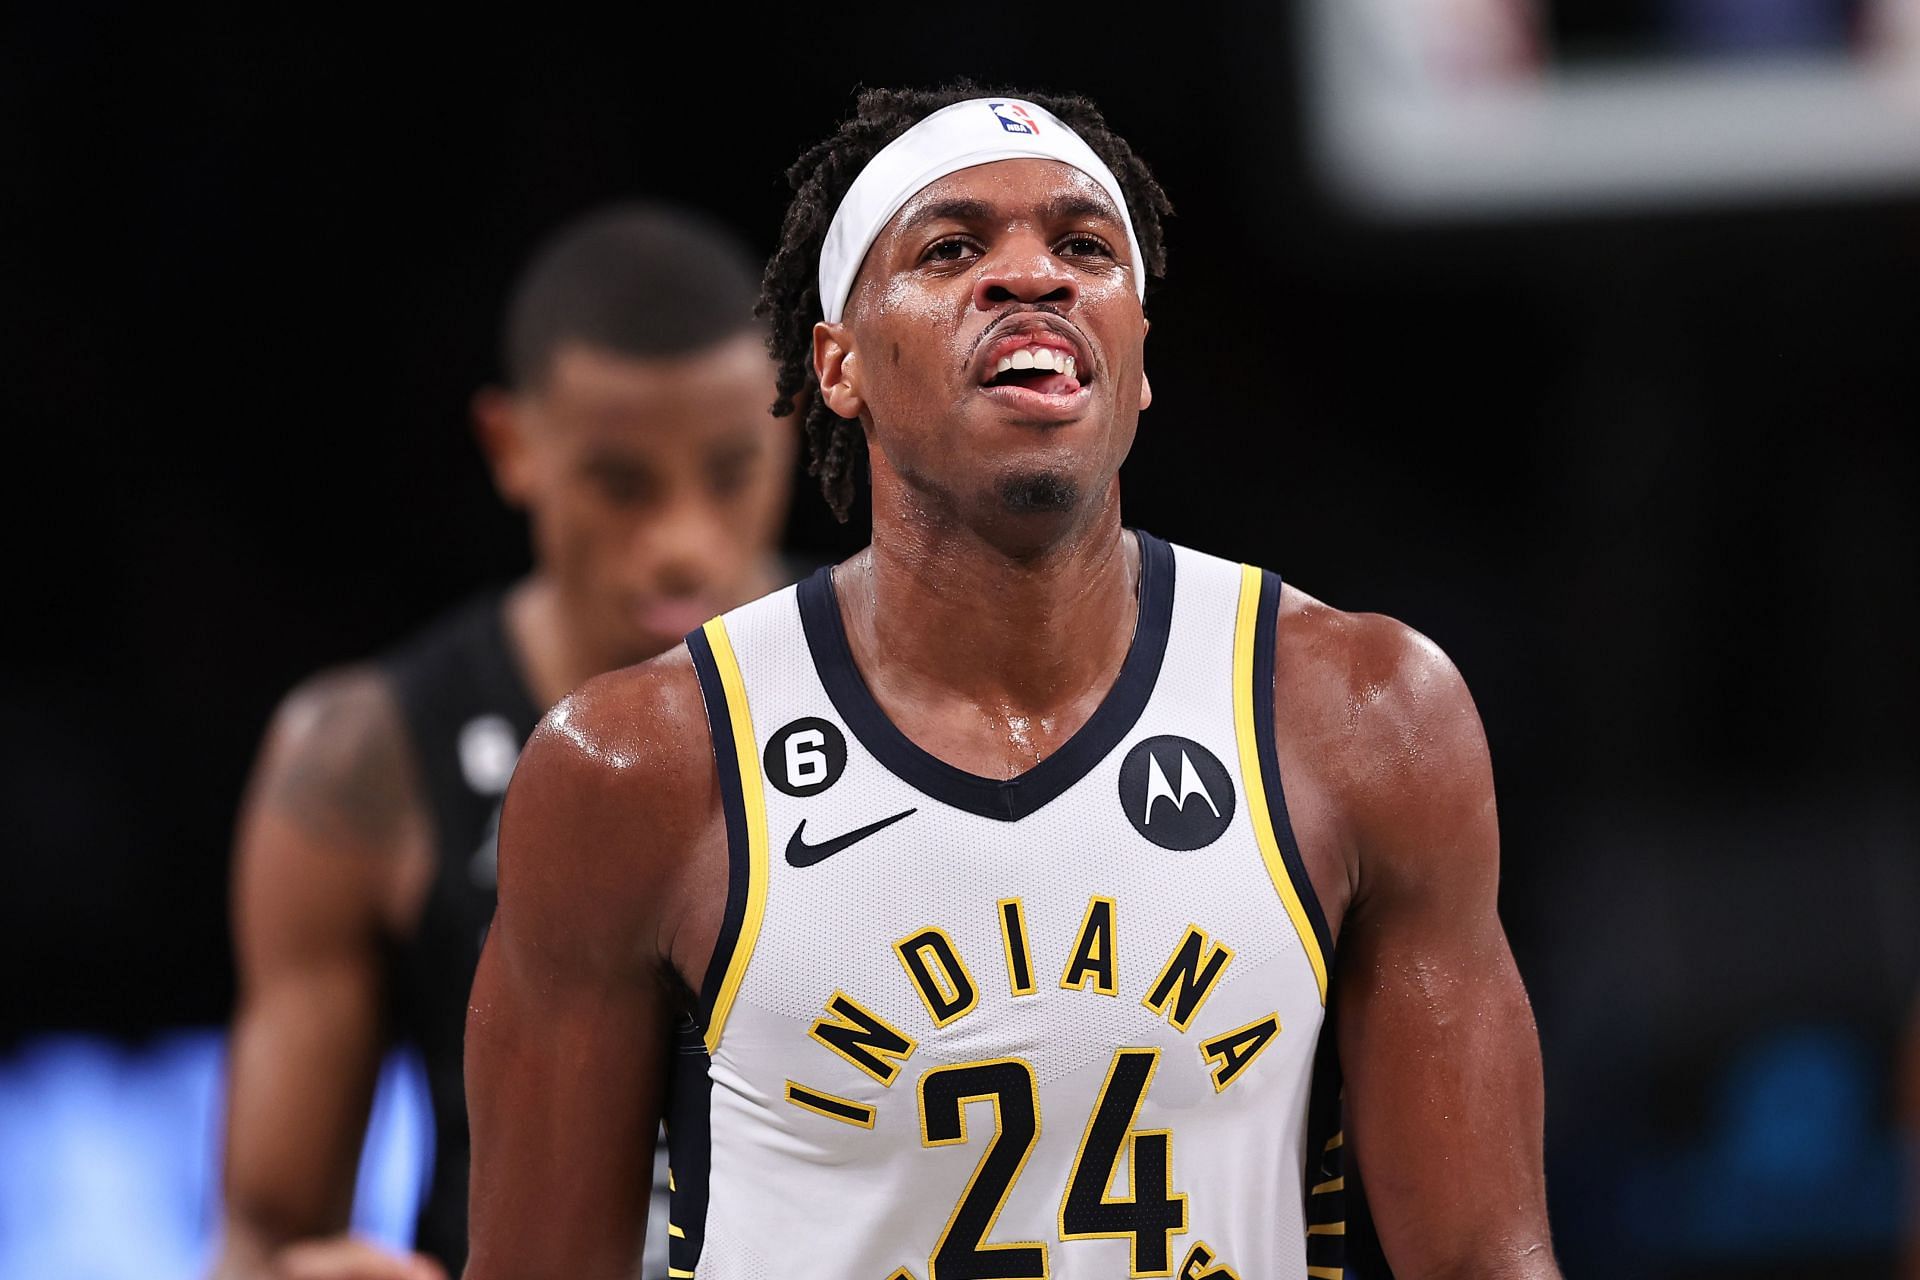 Buddy Hield of the Indiana Pacers